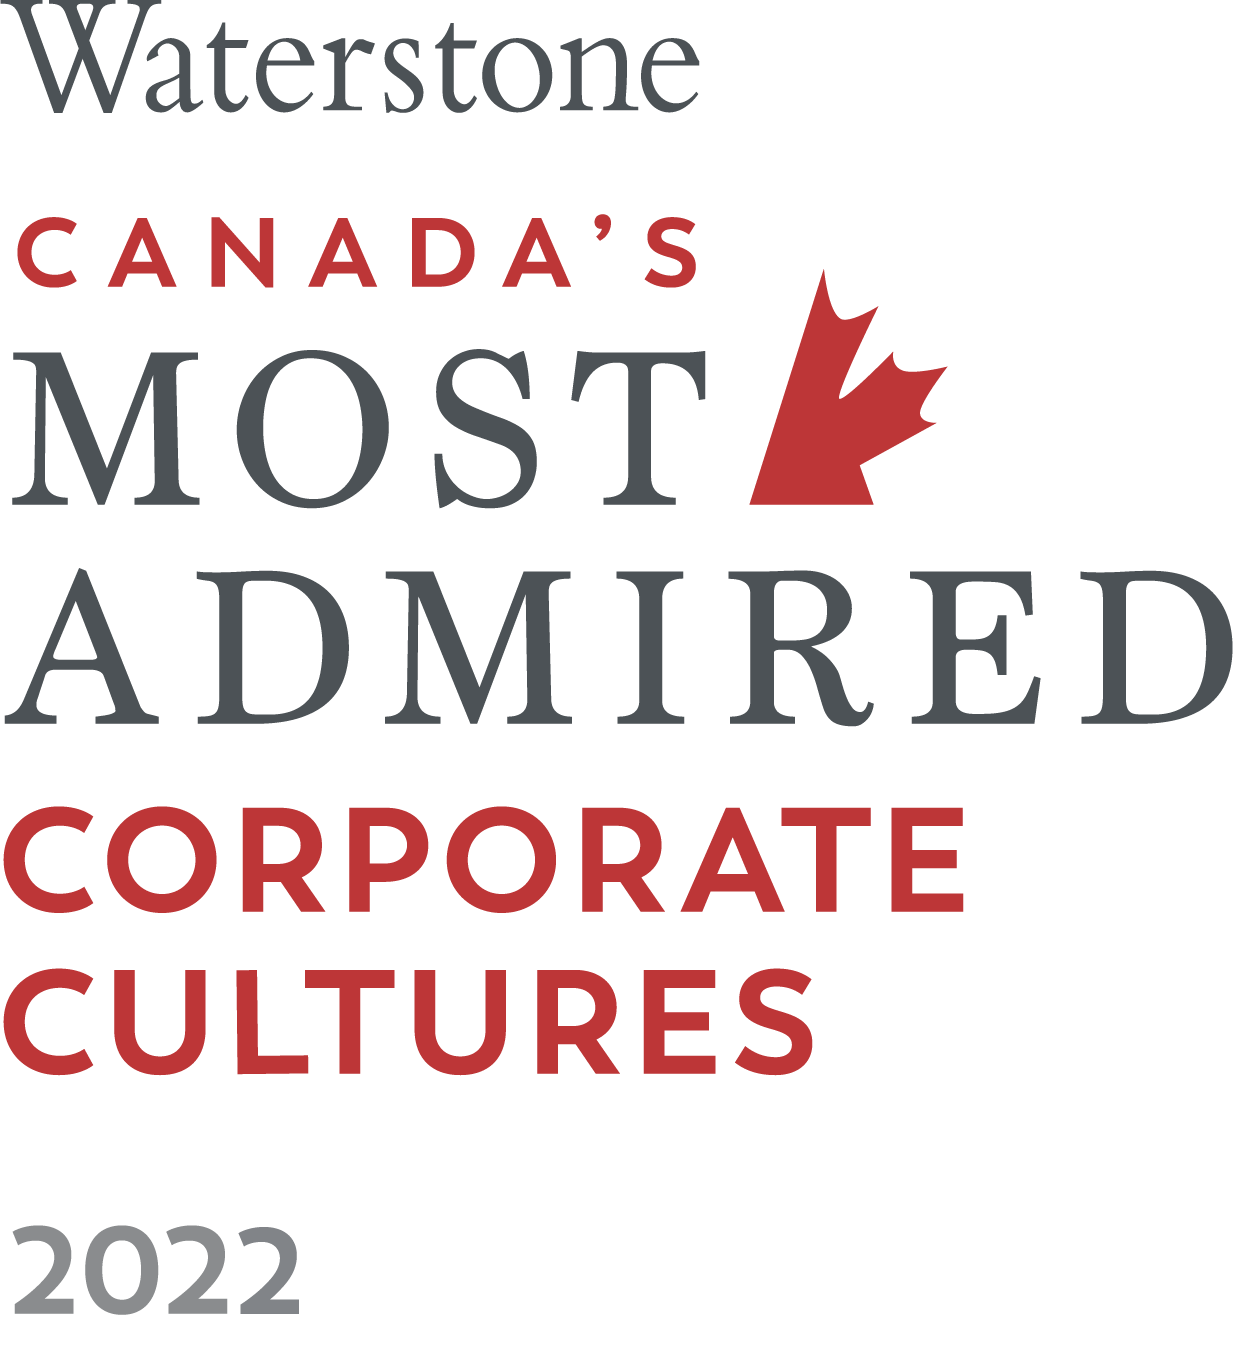 Waterstone Canada's Most Admired Corporate Cultures 2022